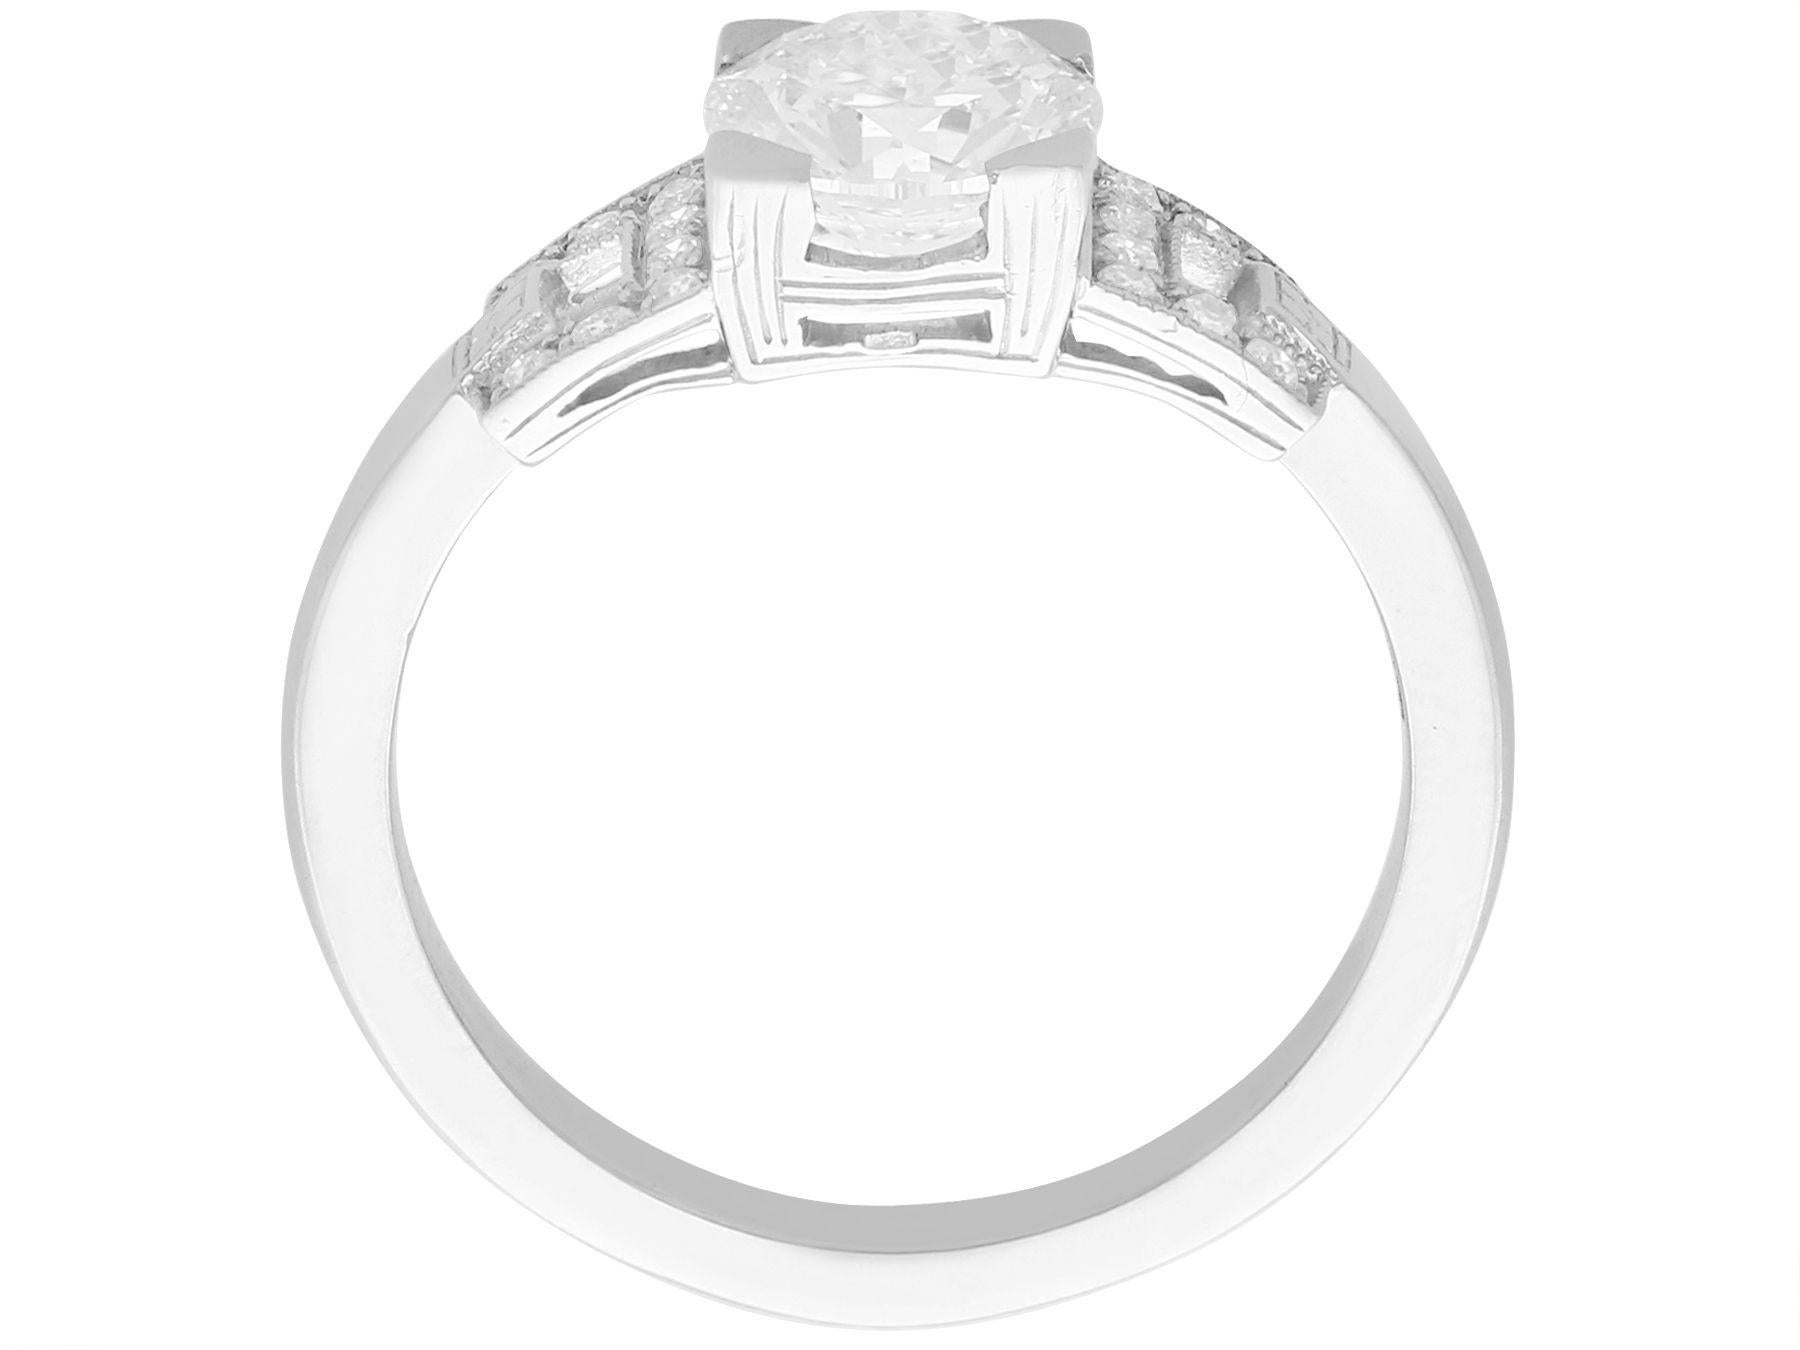 Women's or Men's 1.22 Carat Diamond and Platinum Solitaire Ring For Sale